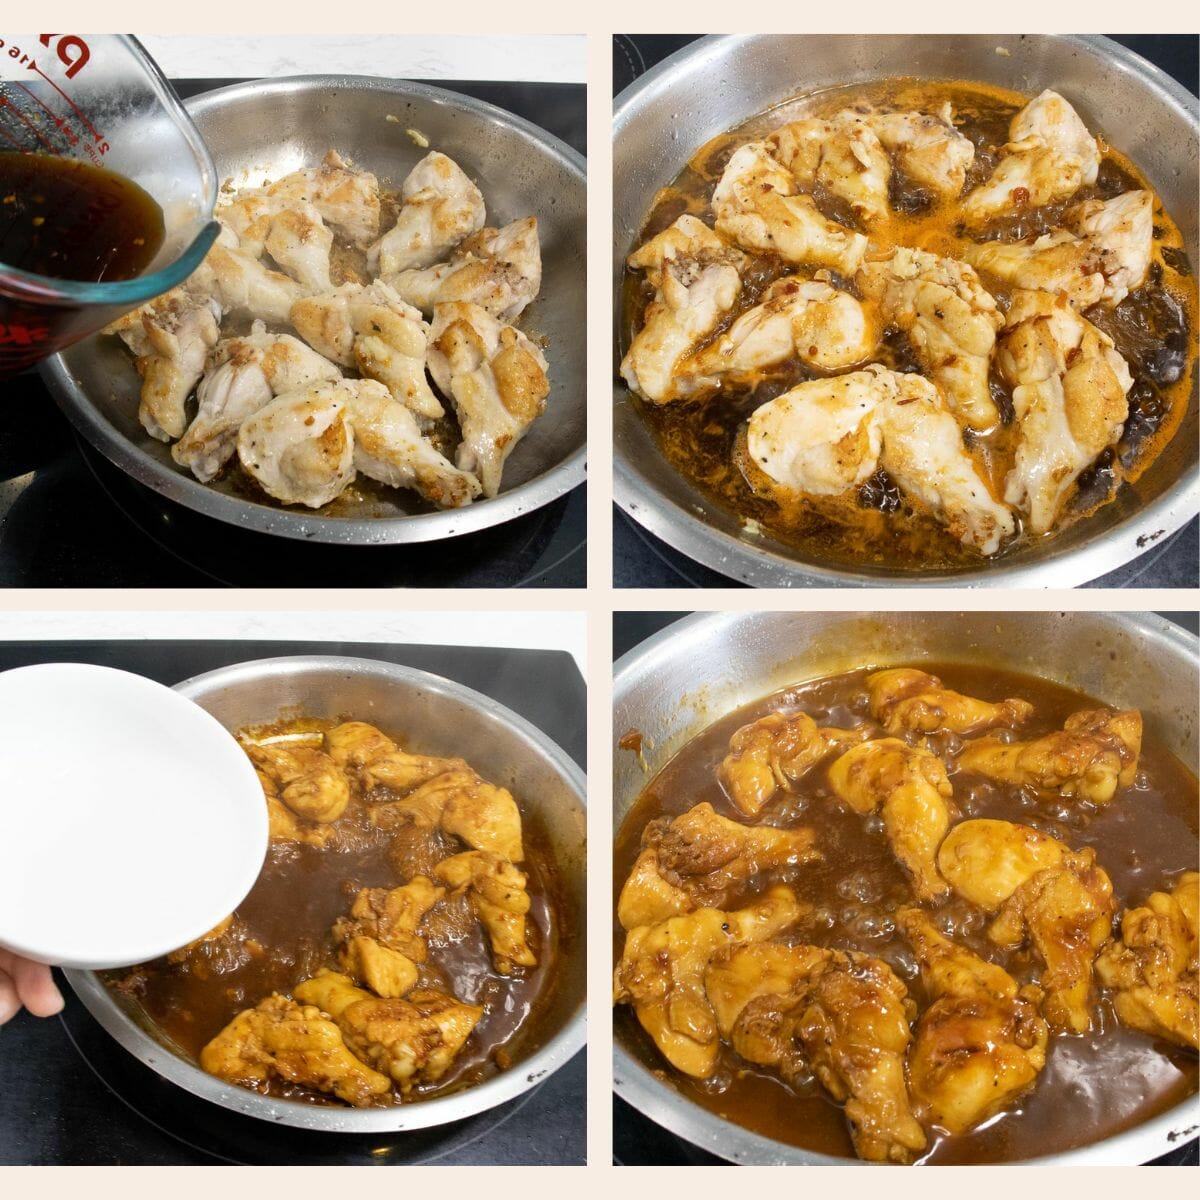 add the sauce and slurry to pan fried chicken drumettes to make savory chicken